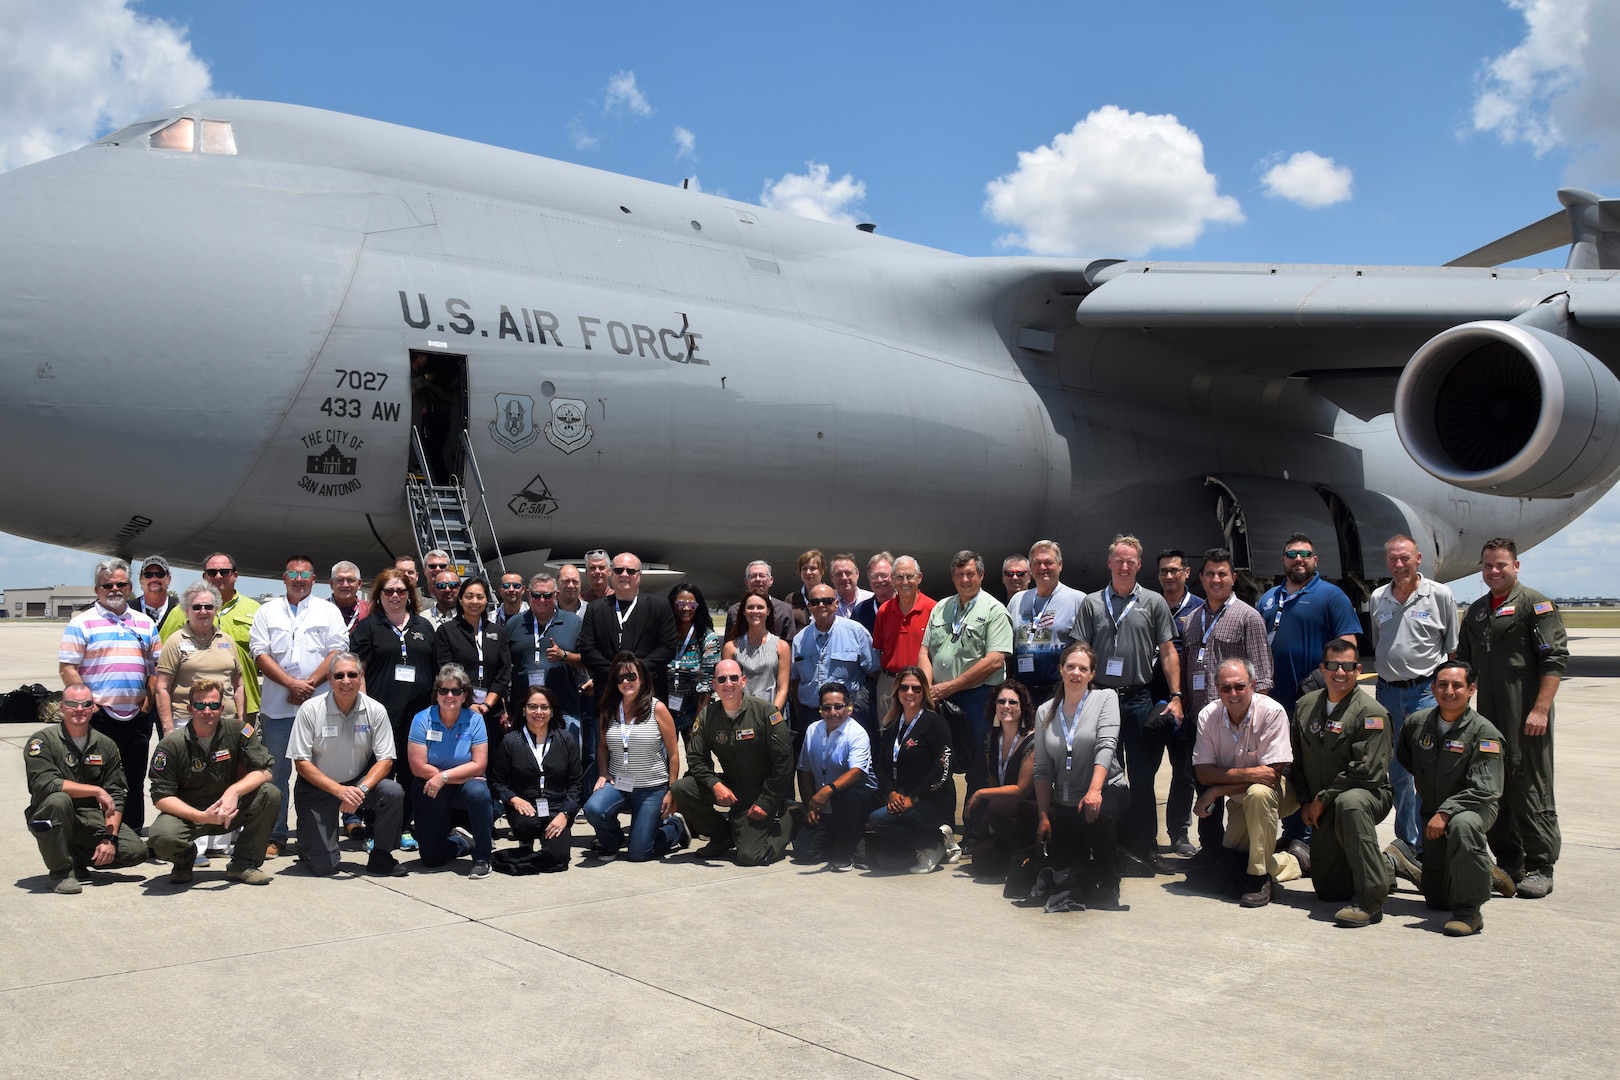 A 433rd Airlift Wing aircrew, 33 civilian employers and Texas Employer Support of the Guard and Reserve program volunteers take a moment after an Operation Bosslift flight onboard a C-5M Super Galaxy at Joint Base San Antonio-Lackland, Texas, Aug. 4, 2018. The event highlighted the 433rd Airlift Wing's mission to employers of the Alamo Wing’s Reserve Citizen Airmen, which includes providing massive strategic airlift for deployments and to supply combat and support forces worldwide. (U.S. Air Force photo by Staff Sgt. Lauren M. Snyder)